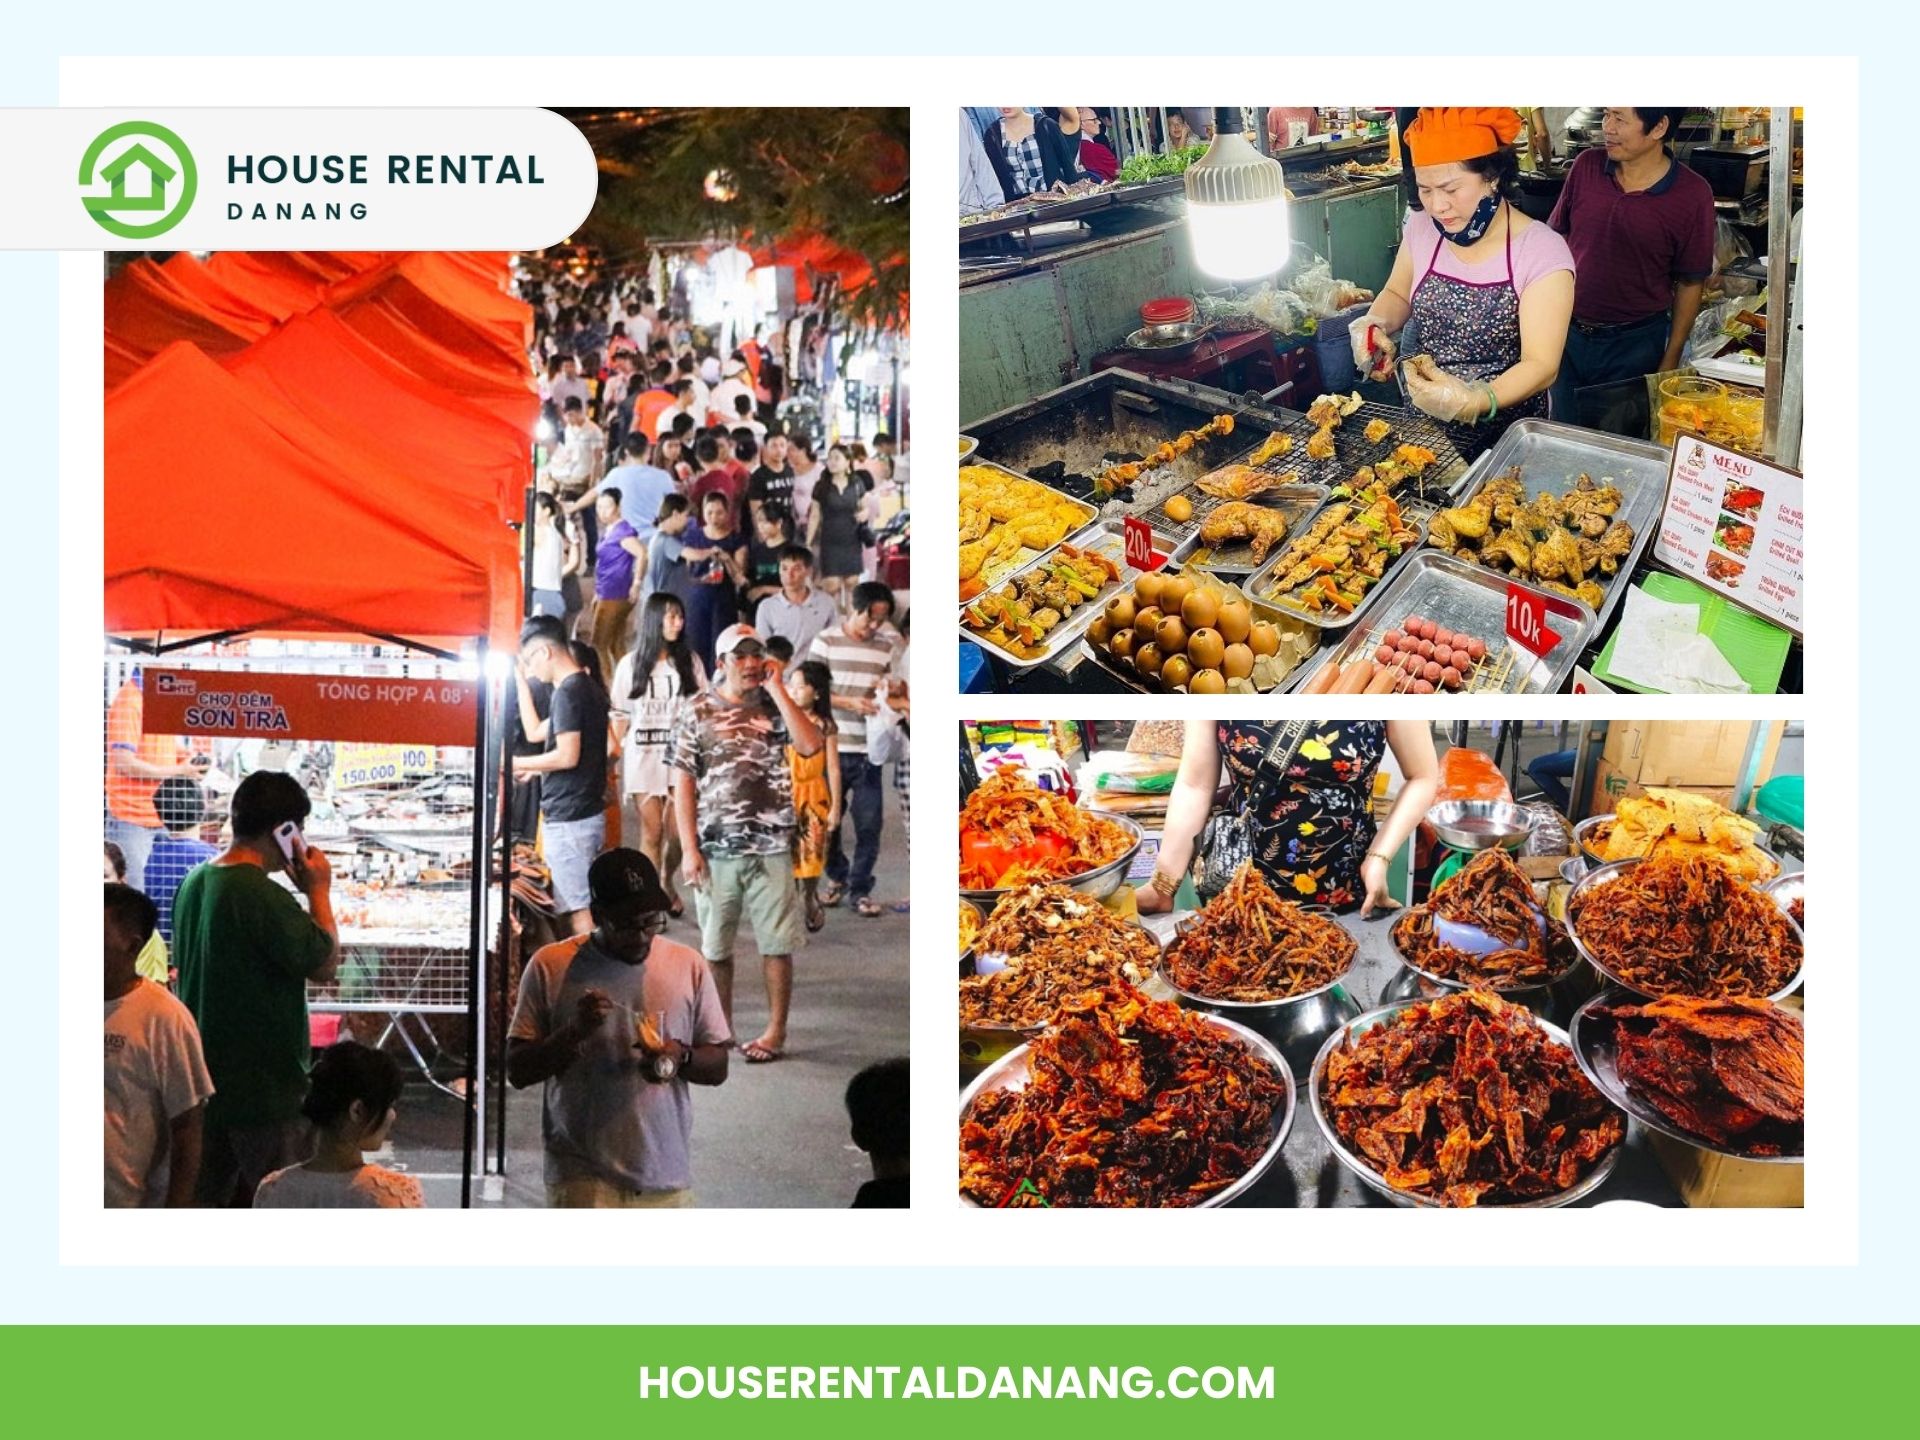 Collage of images from the vibrant night markets in Danang: a bustling crowd on a lively street, a vendor standing behind an array of fried foods, and another offering an assortment of dried goods and spices.